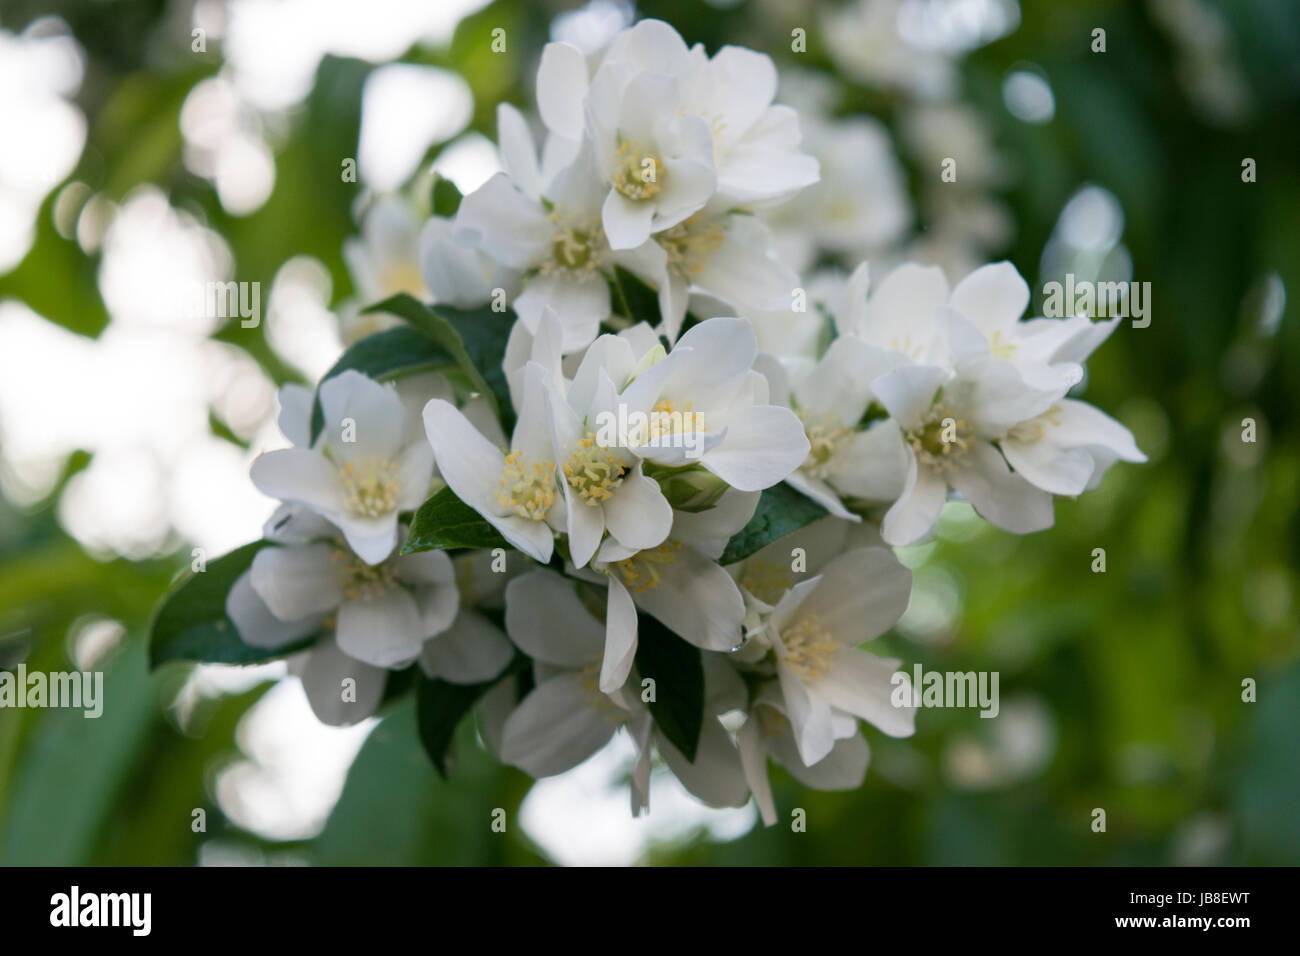 White flowers of sweet mock-orange strongly scented whose perfume resembles orange blossom. Stock Photo